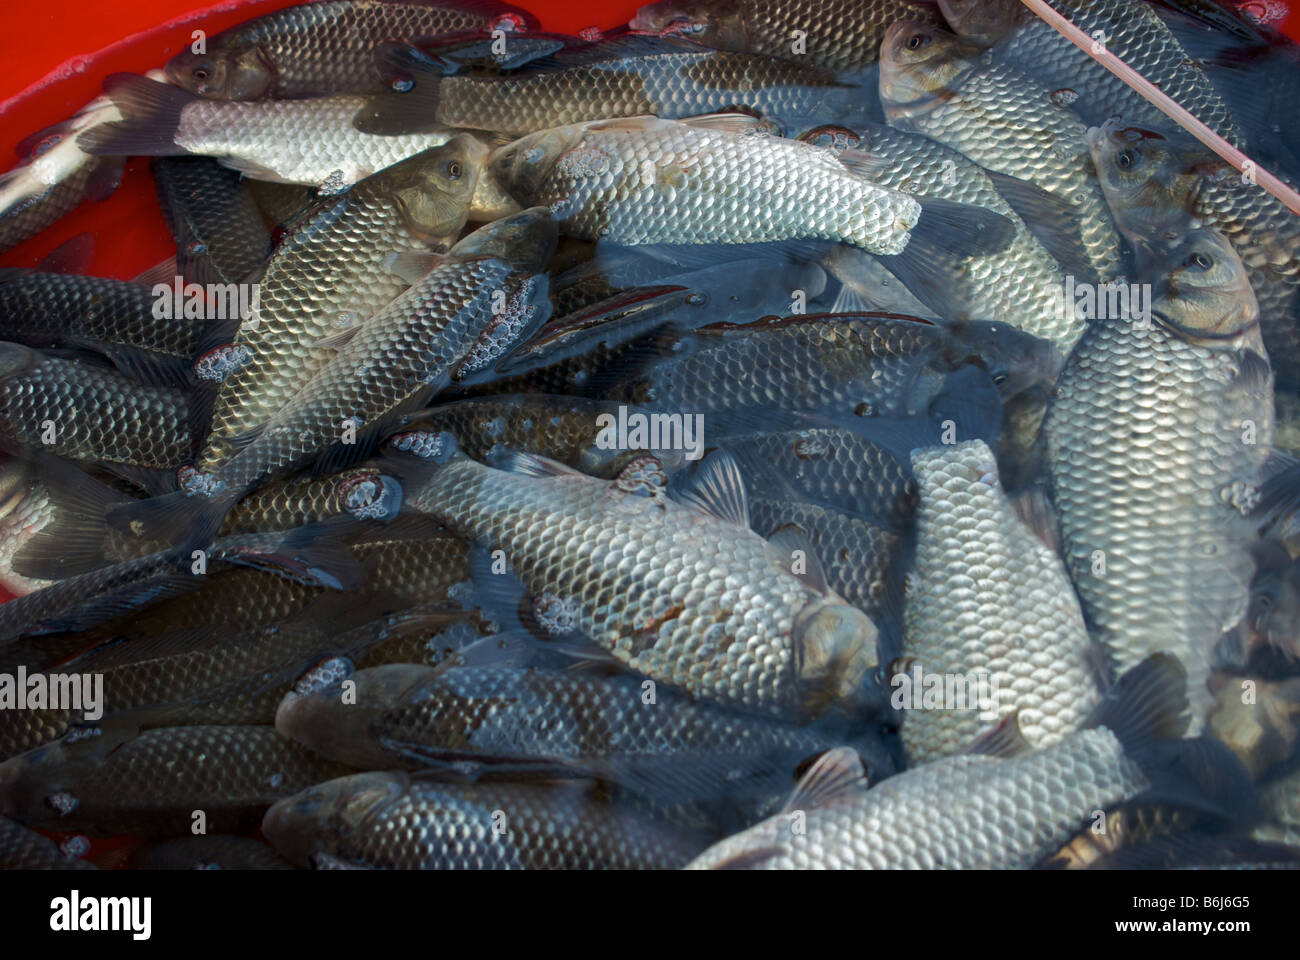 Live Yangtze River fish in plastic tub for sale at street vendor stall in back alley Stock Photo